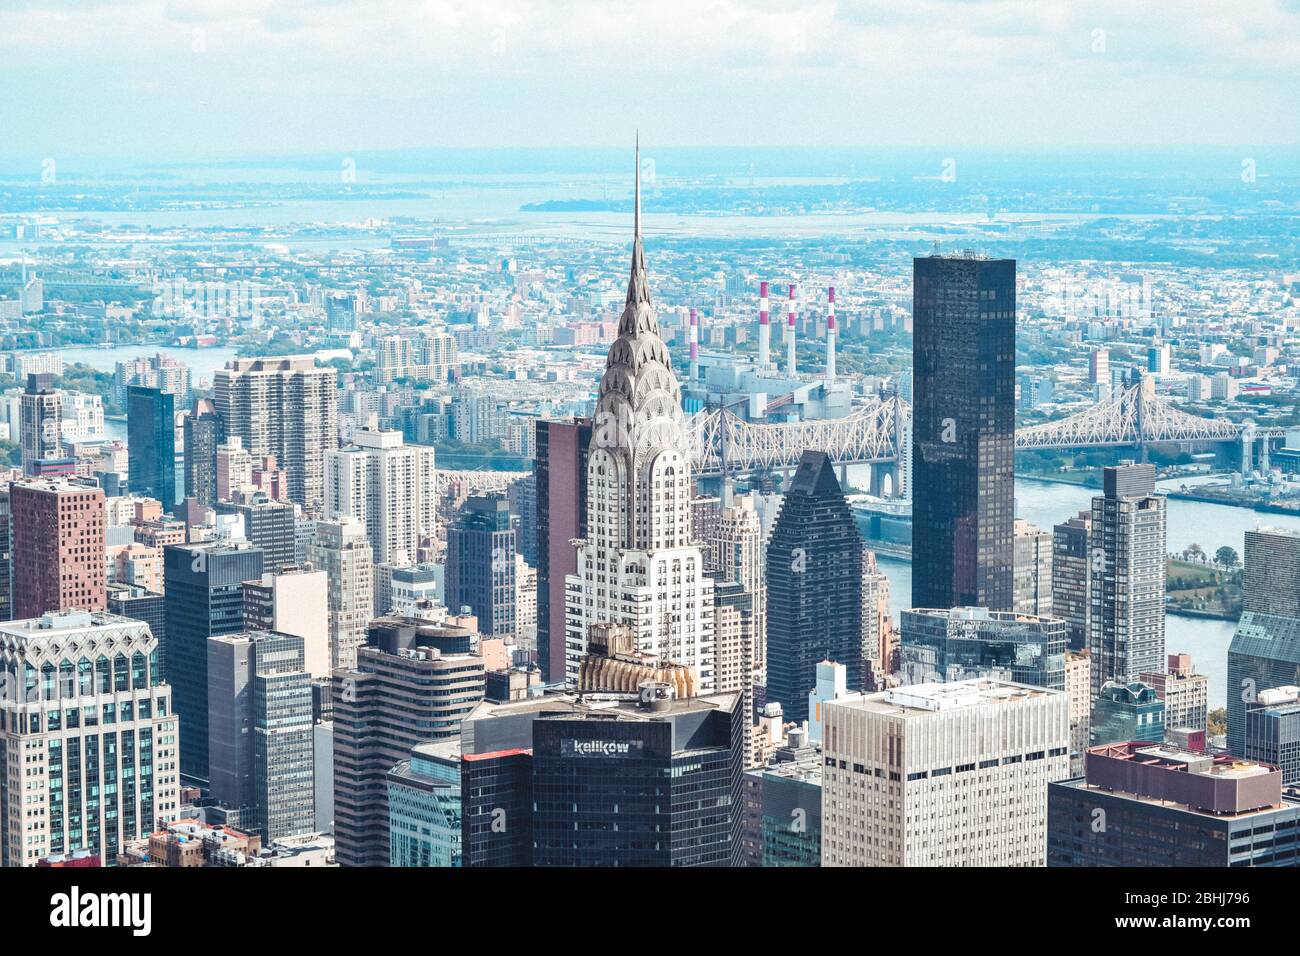 A view of New York City's famous skyline as seen from the top of the Empire State Building. Stock Photo